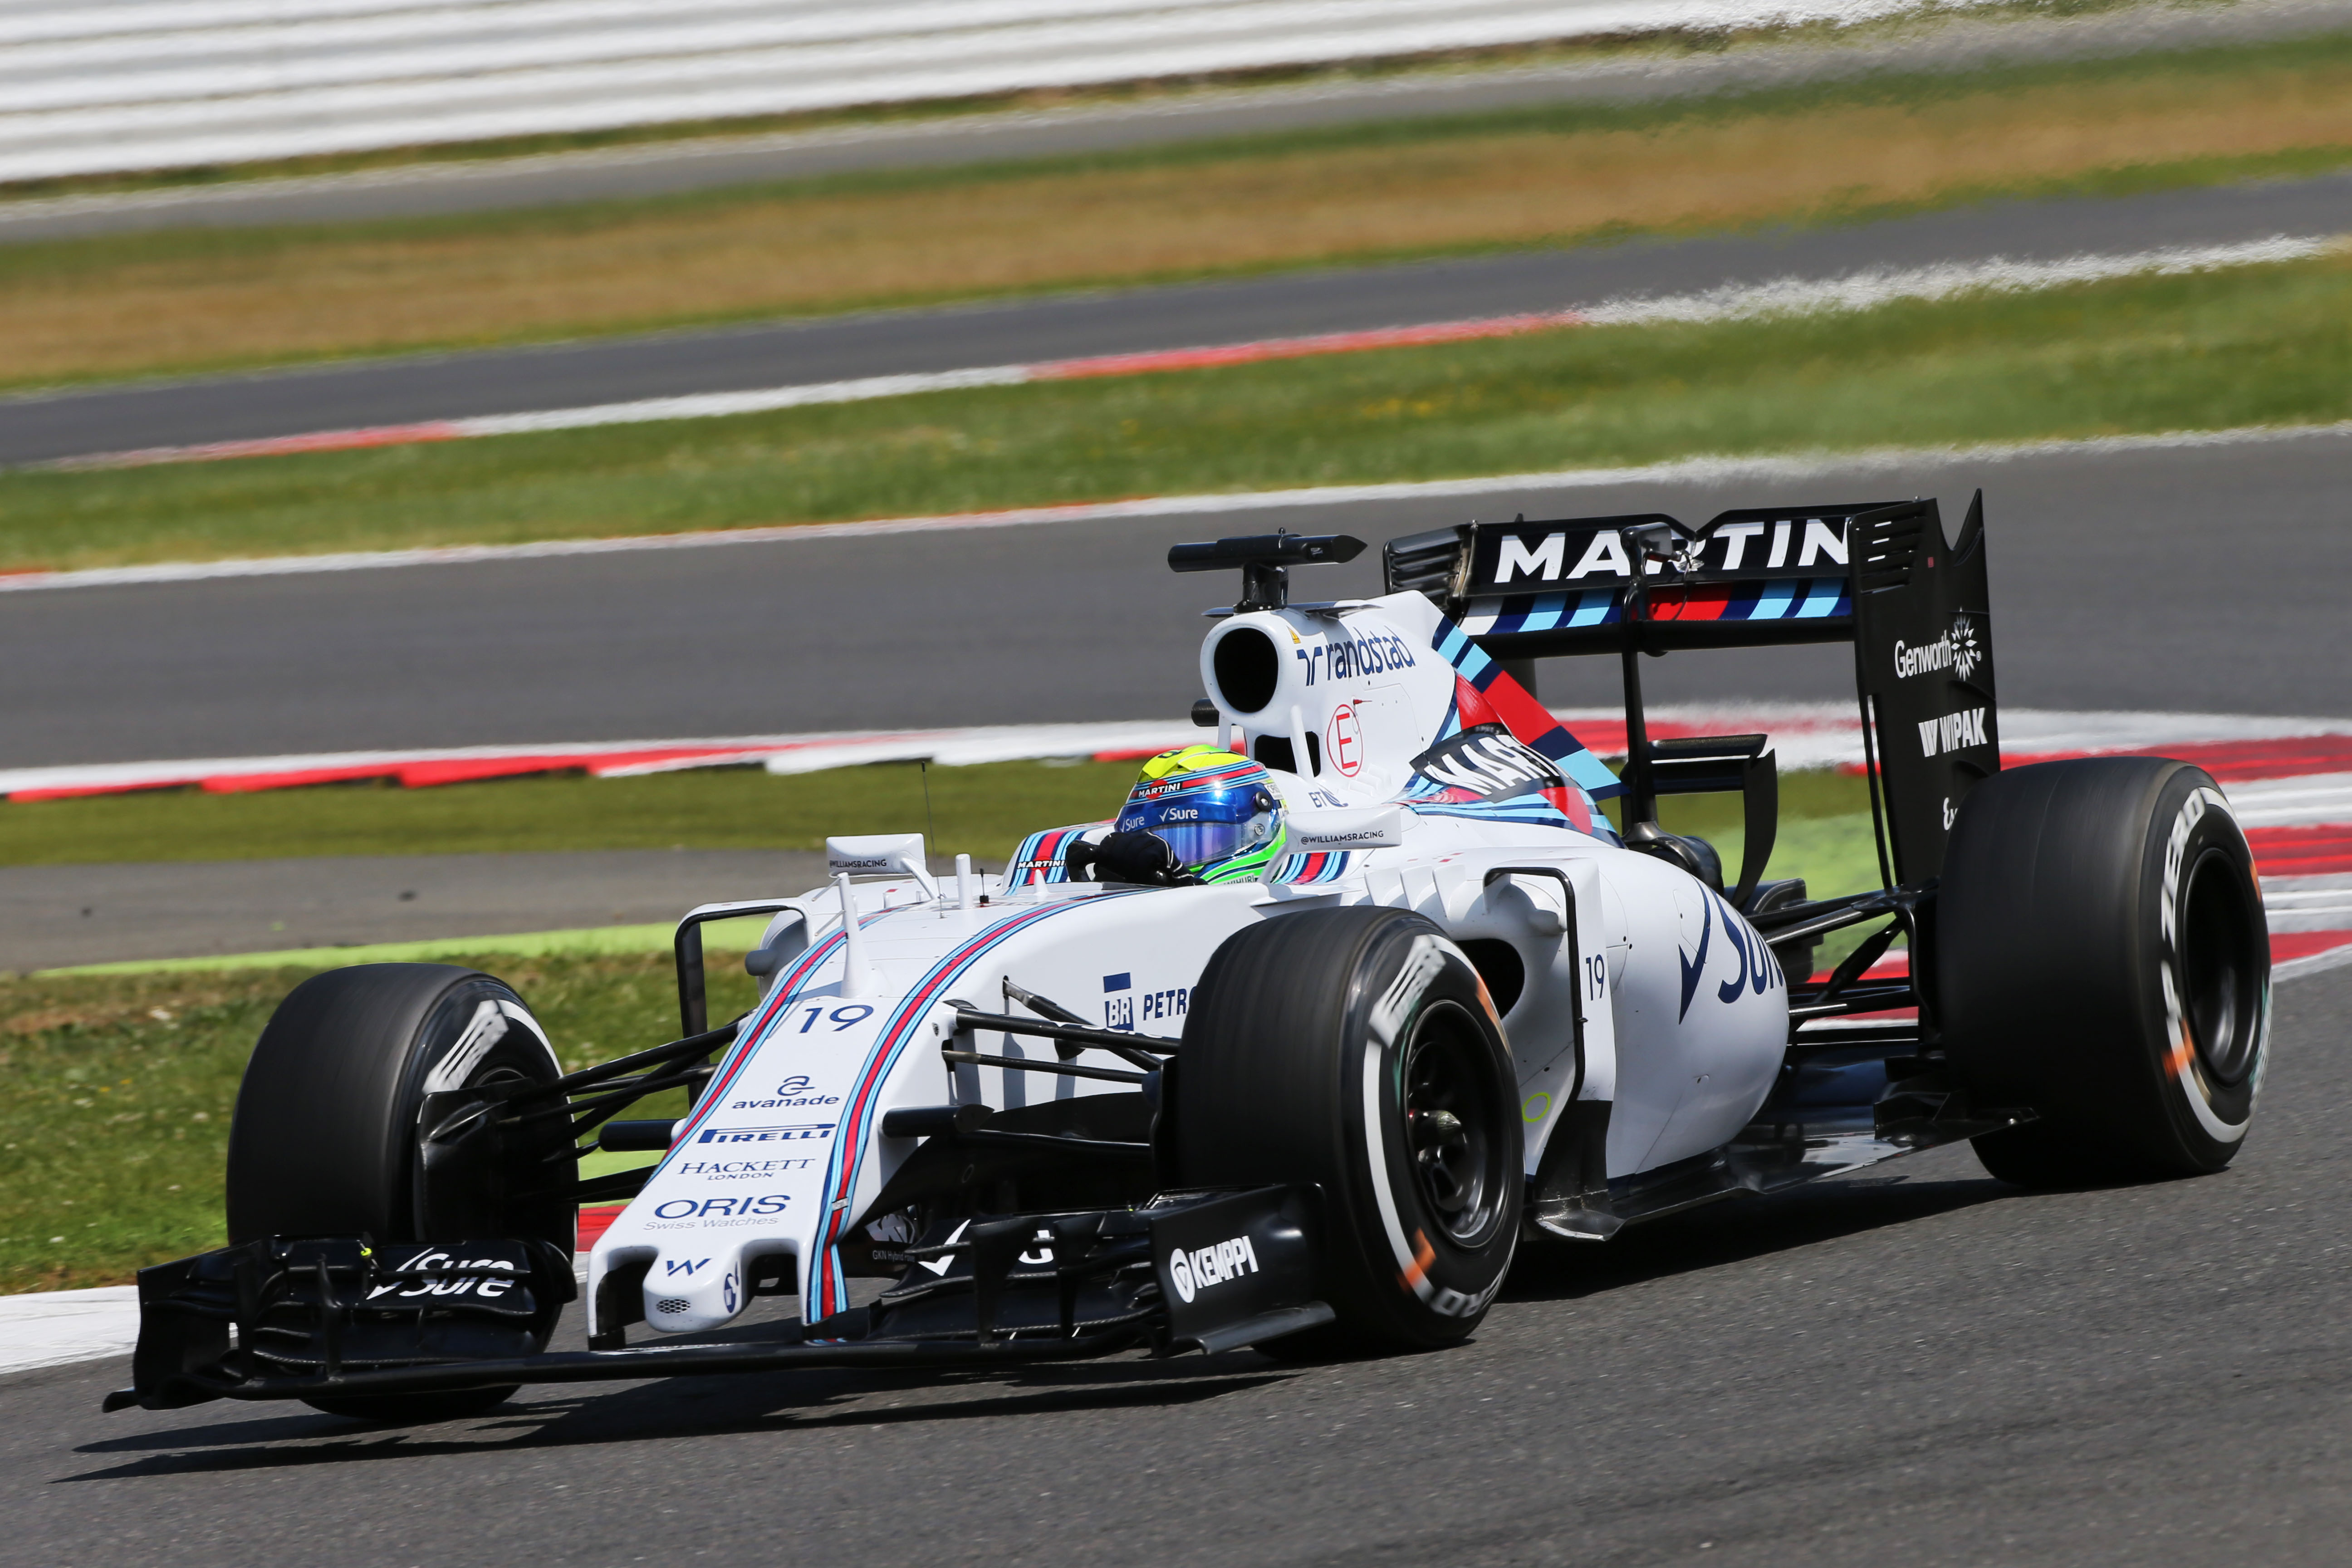 Williams is ‘best of the rest’